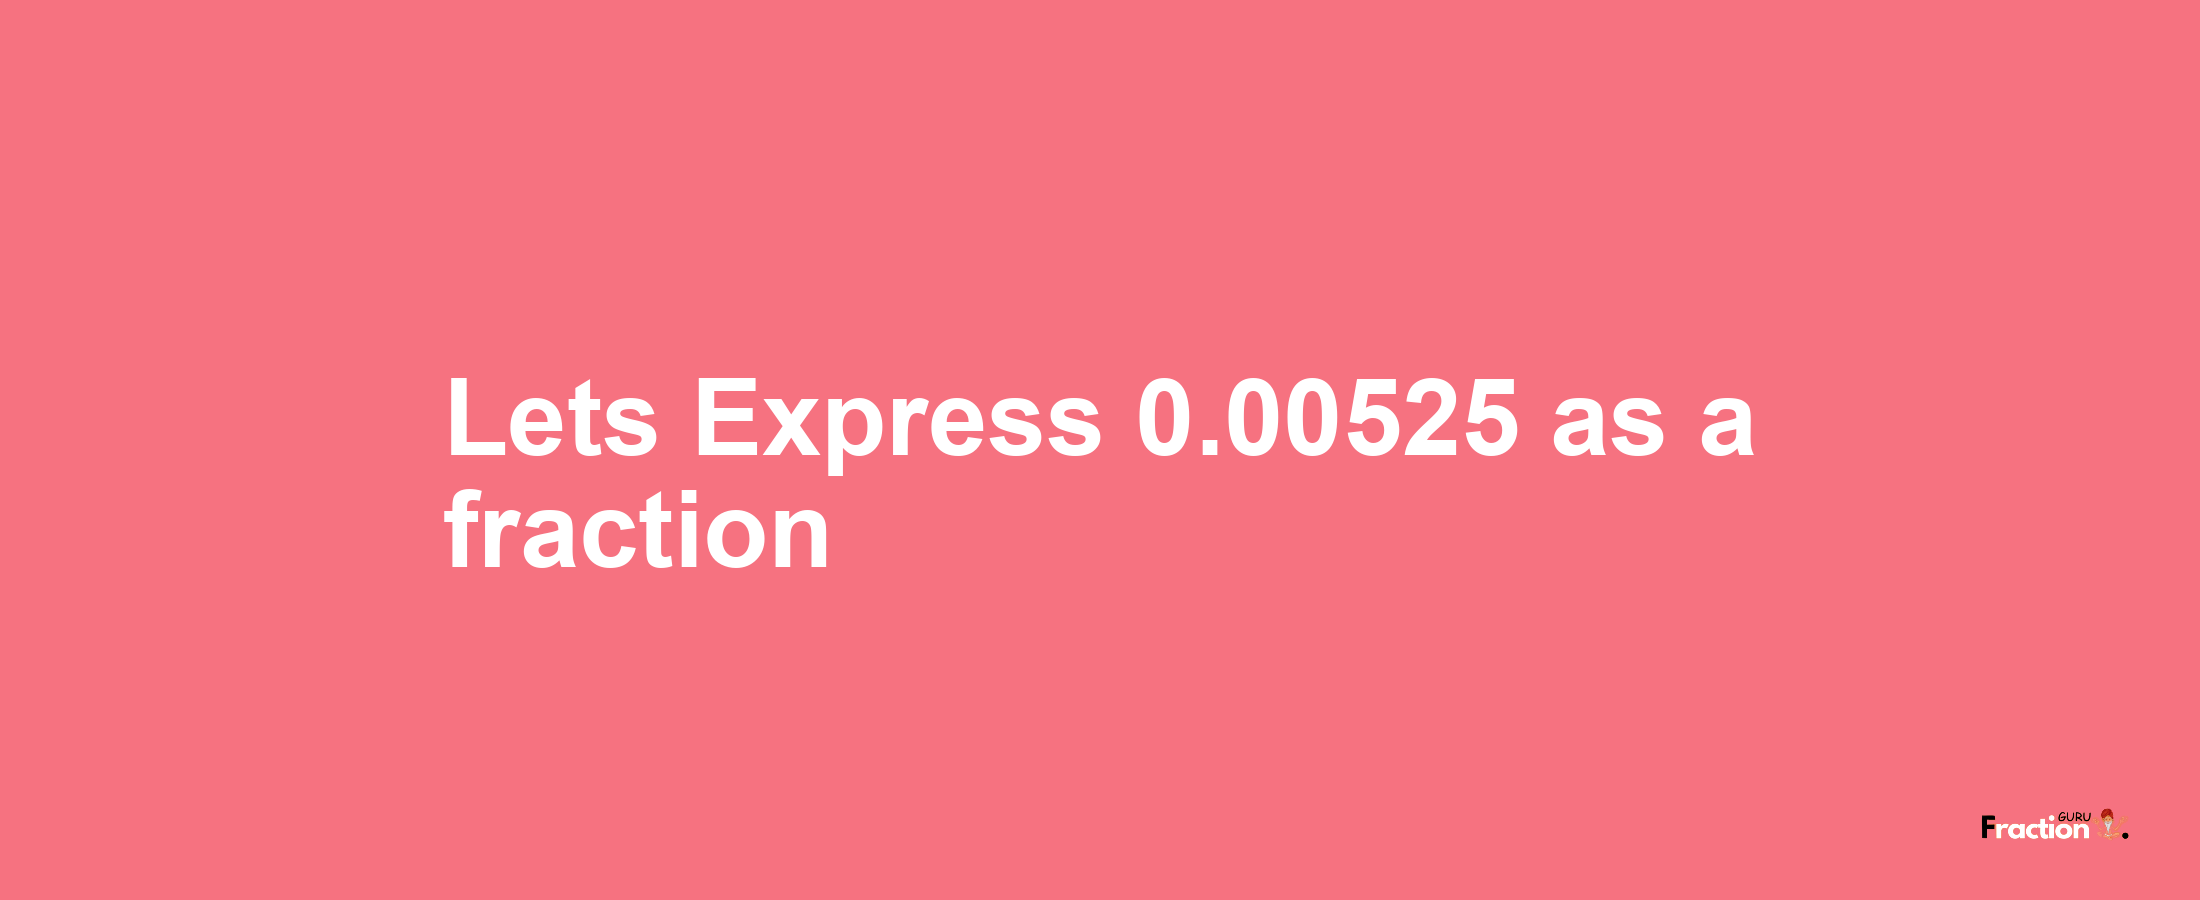 Lets Express 0.00525 as afraction